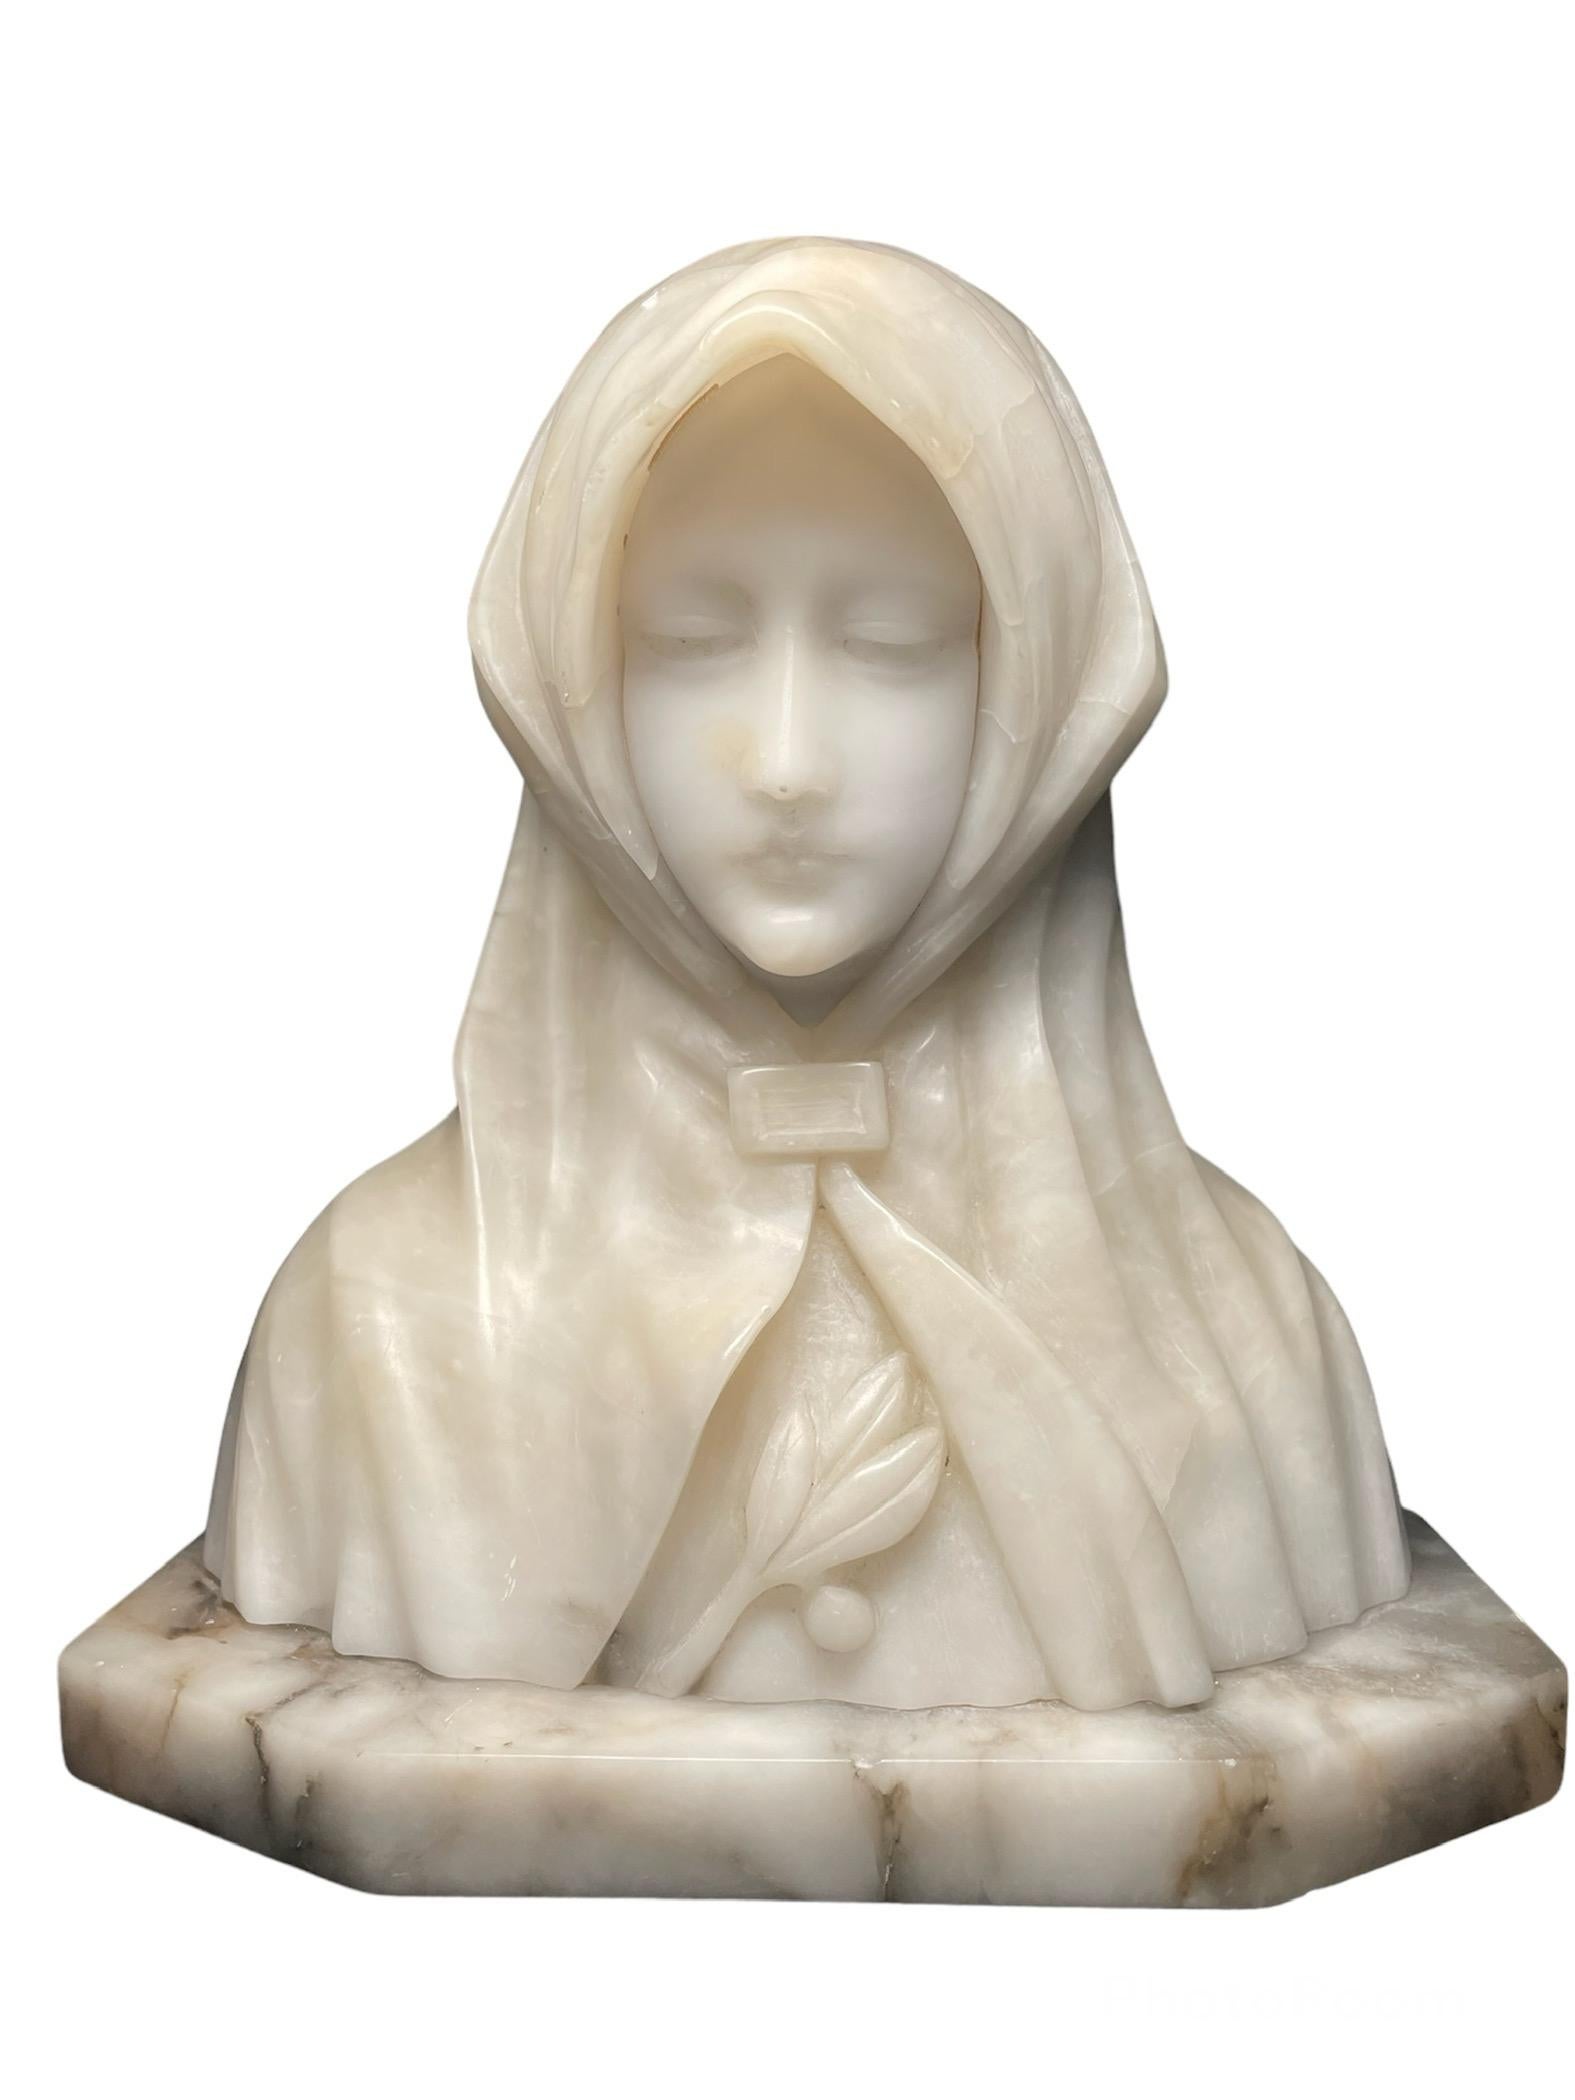 This is an alabaster and marble bust of Saint Clare of Assisi. It depicts a young lady head/face covered with a cloak. She is looking down, very peacefully while she appears to be praying to God. There is a branch of olive that are adorning her